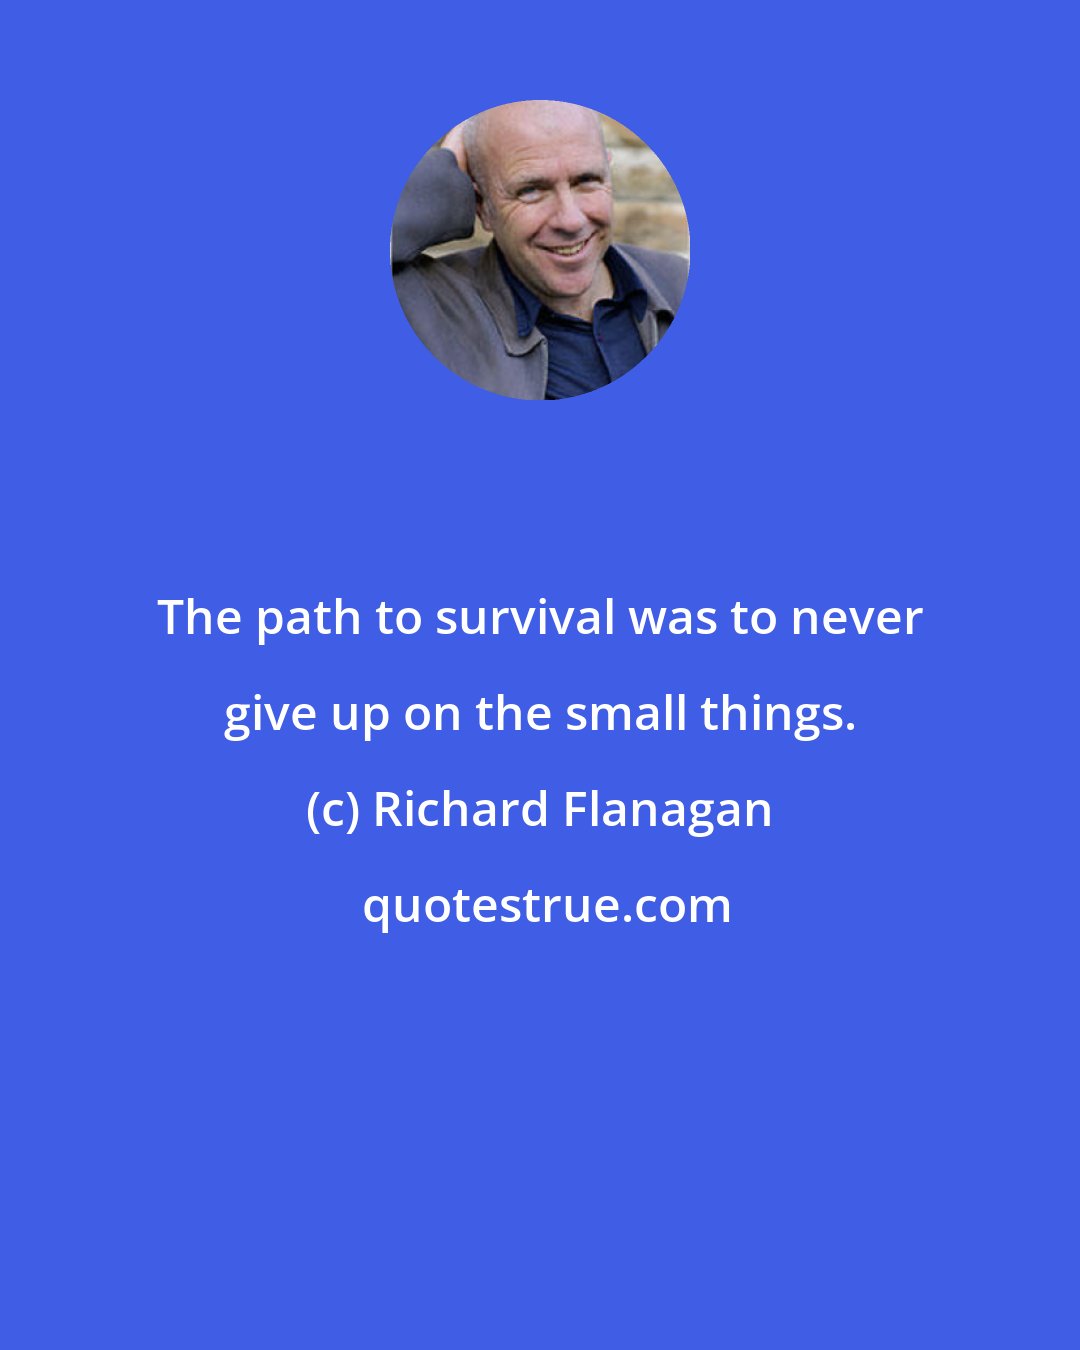 Richard Flanagan: The path to survival was to never give up on the small things.